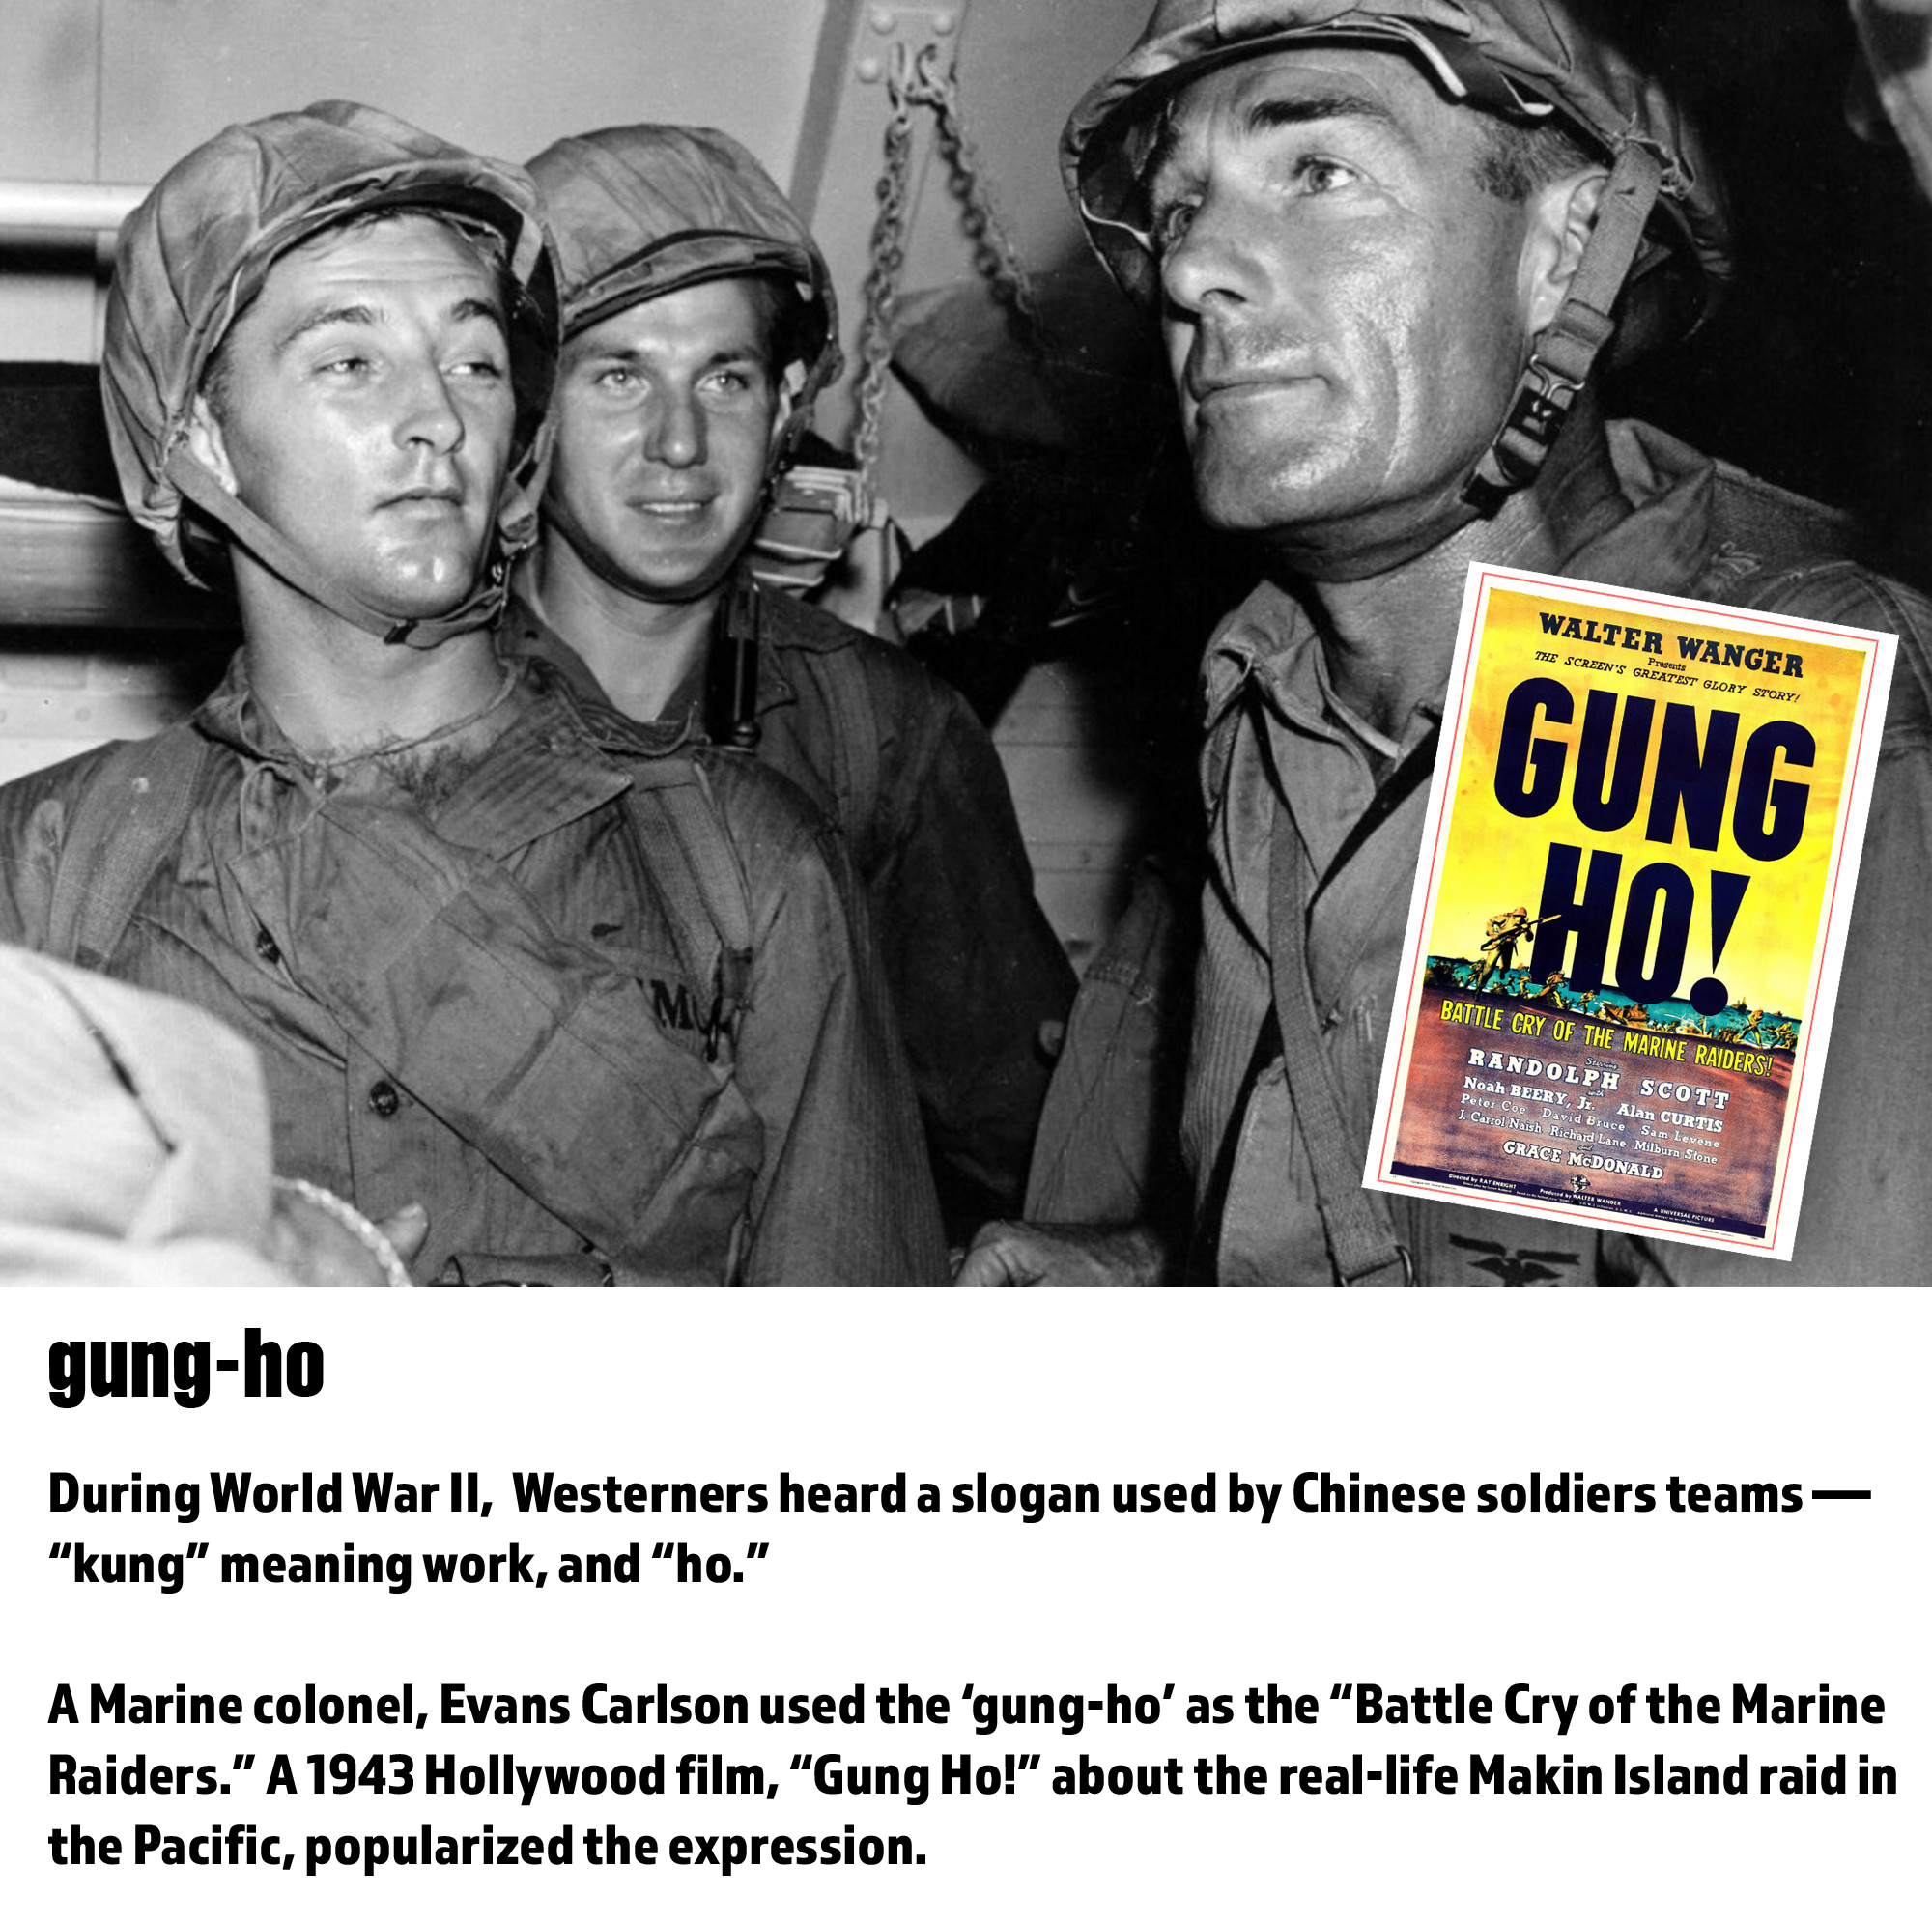 fun word origins history facts - gung-ho - During World War Ii, Westerners heard a slogan used by Chinese soldiers teams